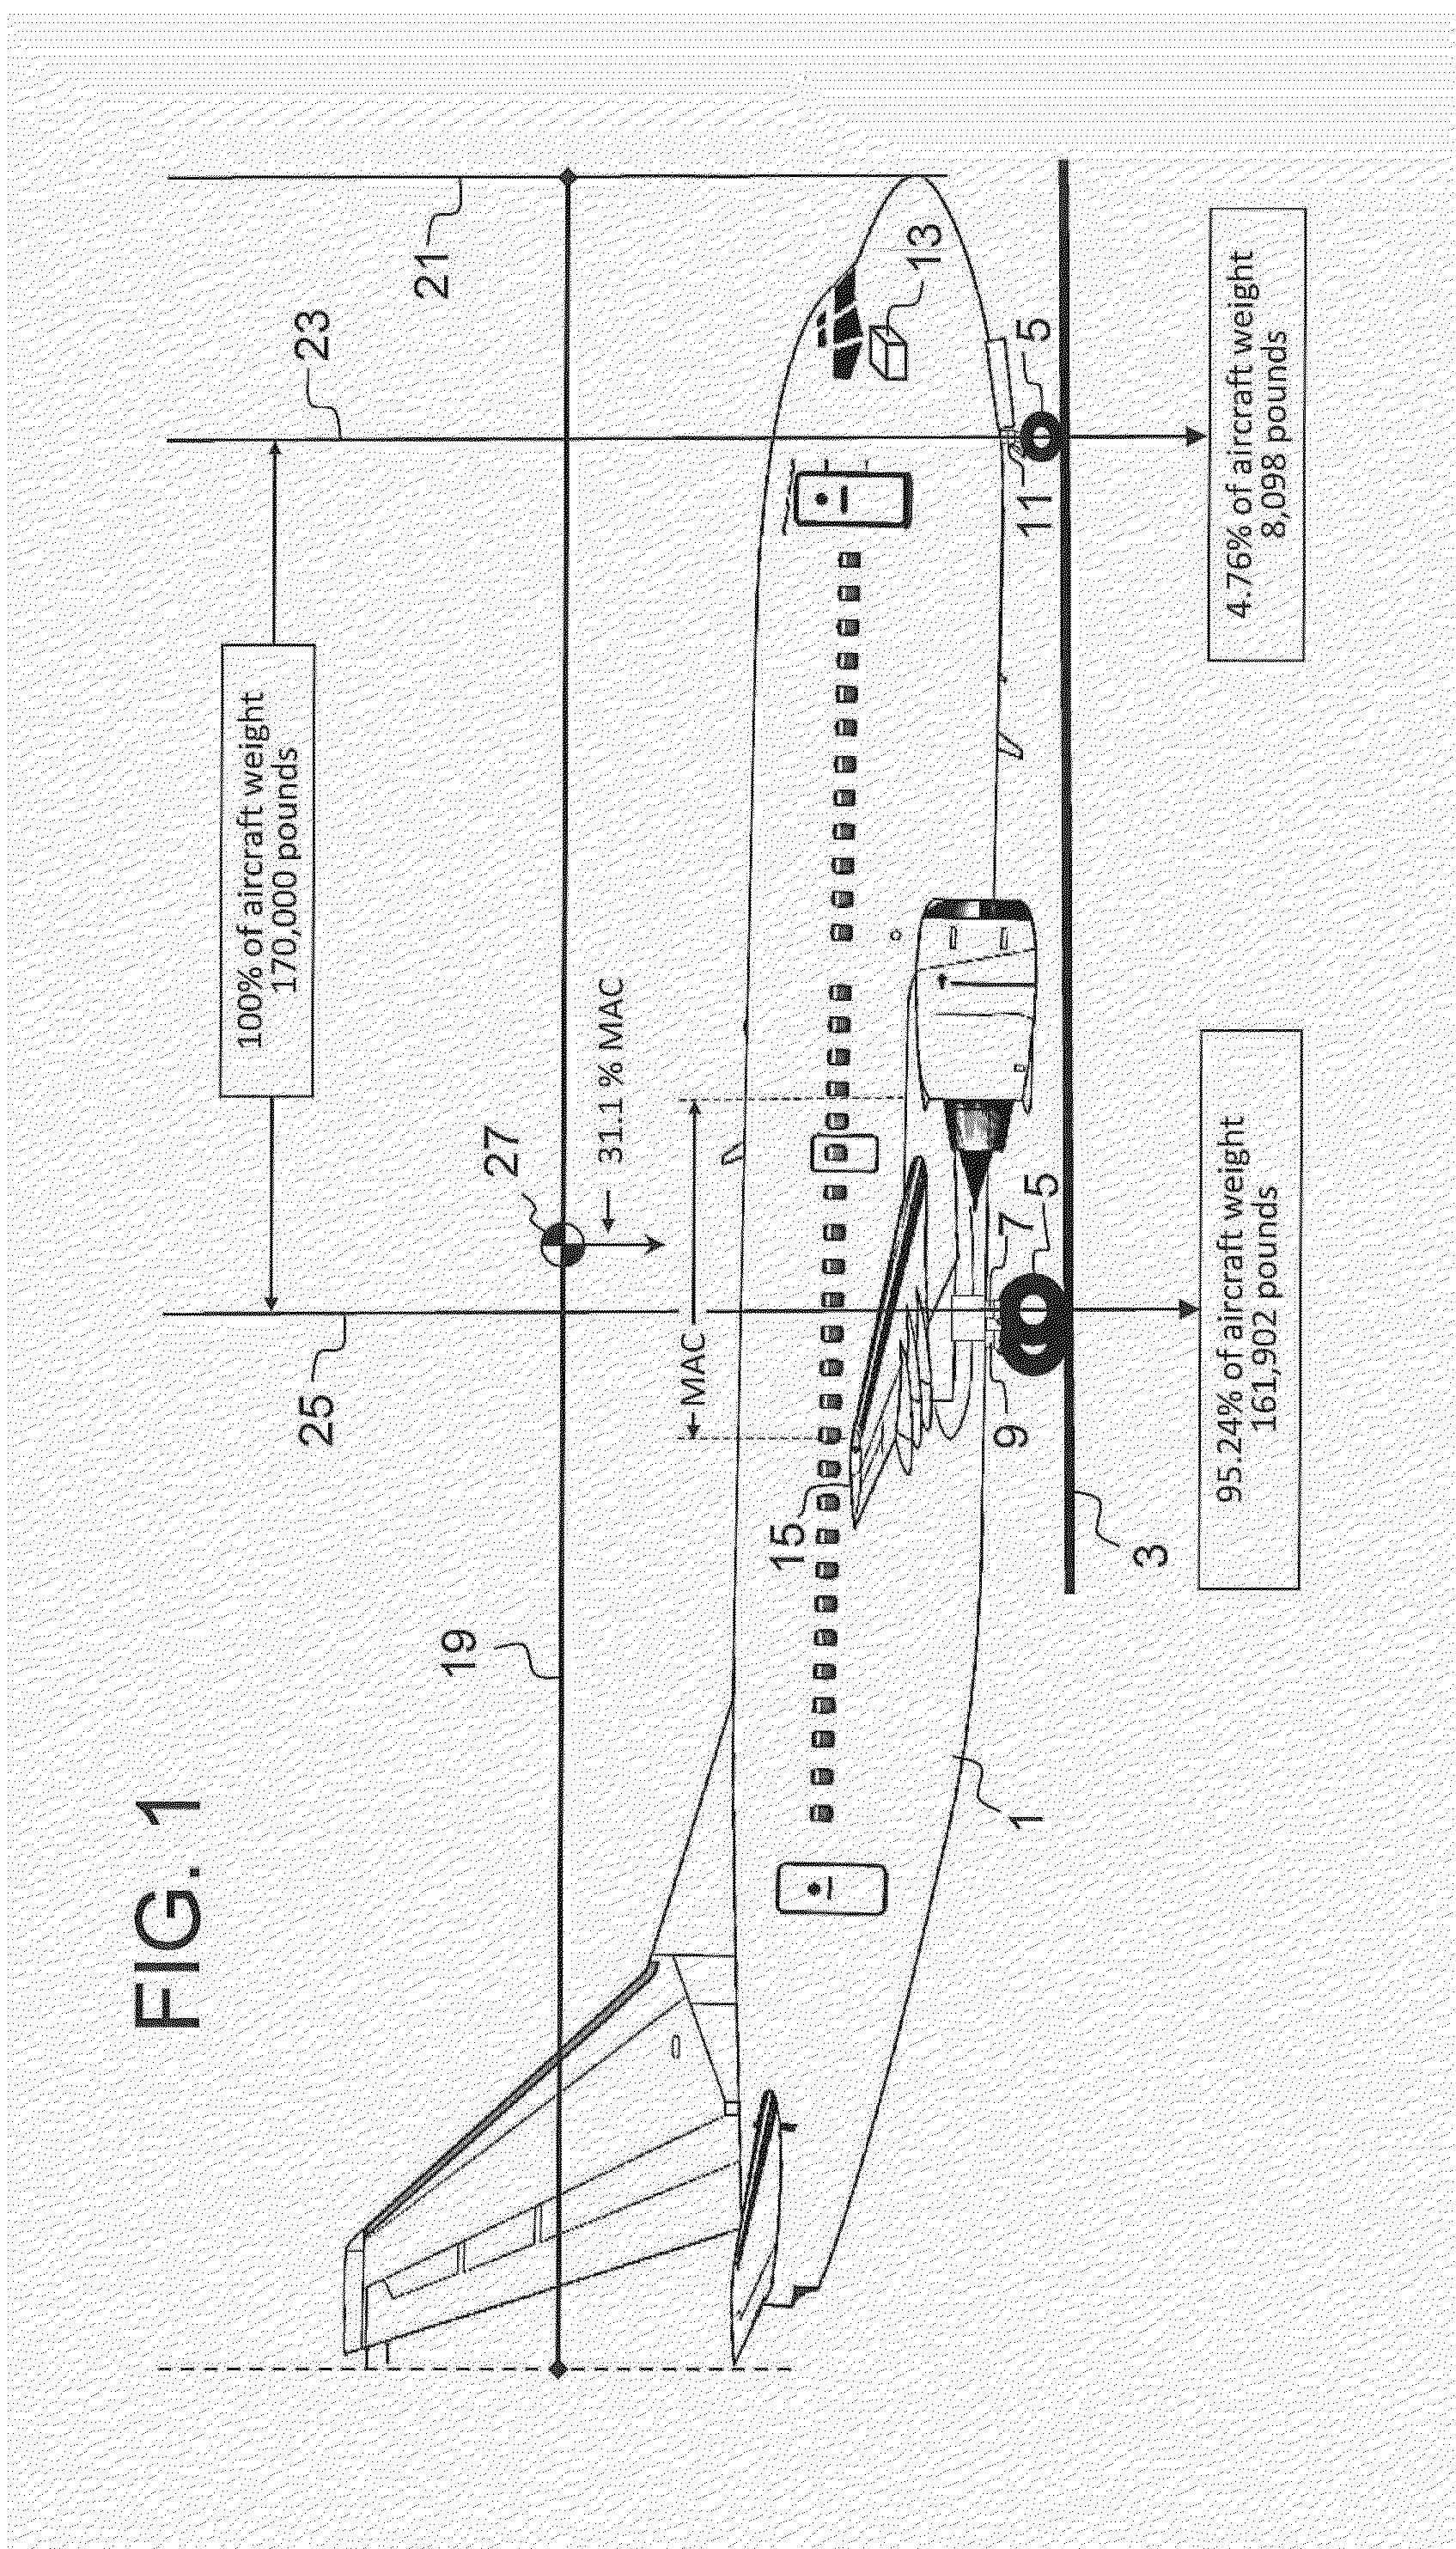 Method for expanding aircraft center of gravity limitations